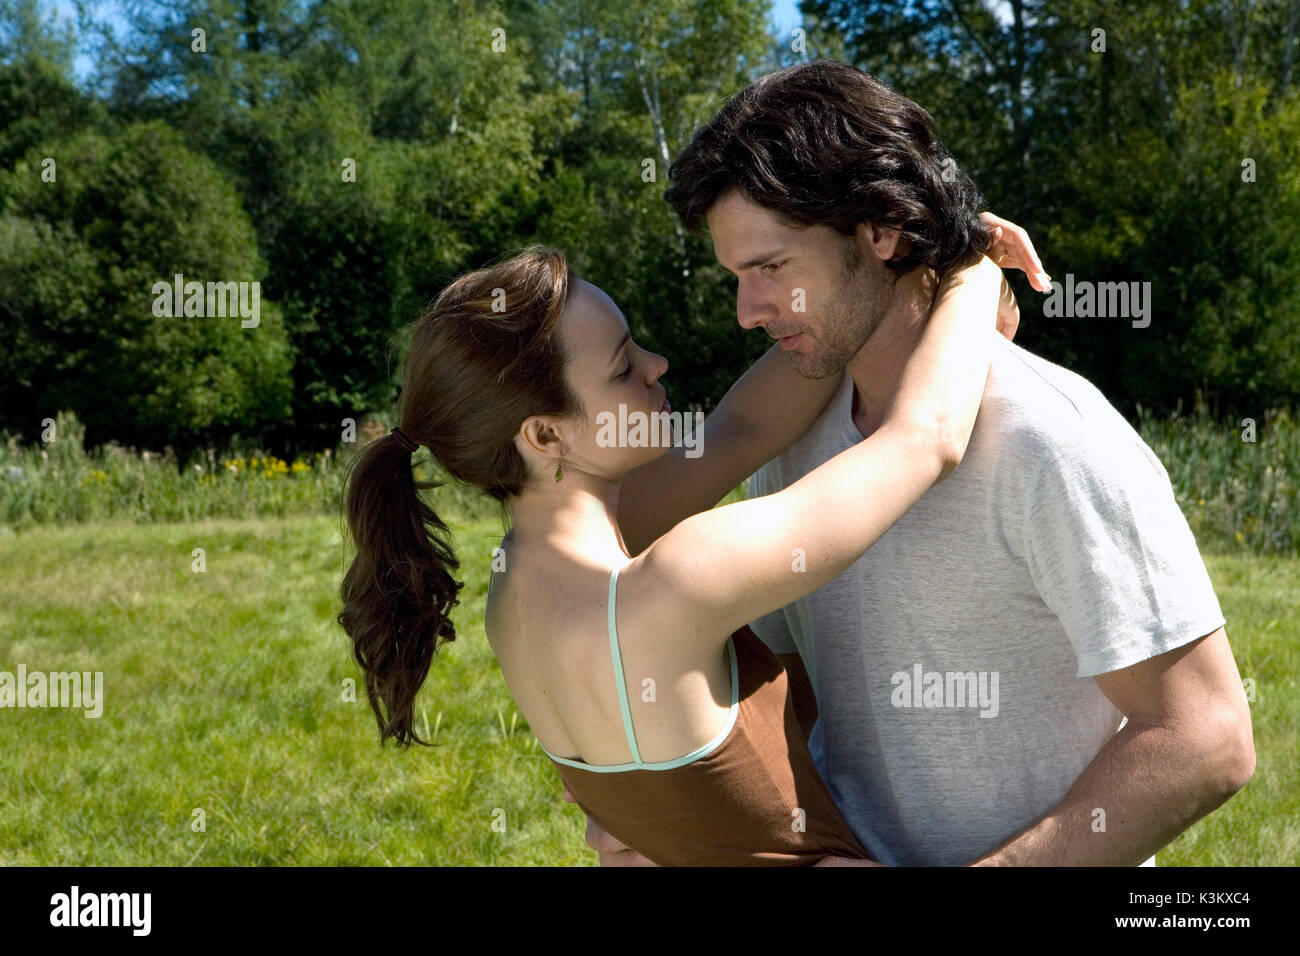 THE TIME TRAVELER'S WIFE [US 2009]  aka THE TIME TRAVELLER'S WIFE [Br title] RACHEL MCADAMS, ERIC BANA           Date: 2009 Stock Photo